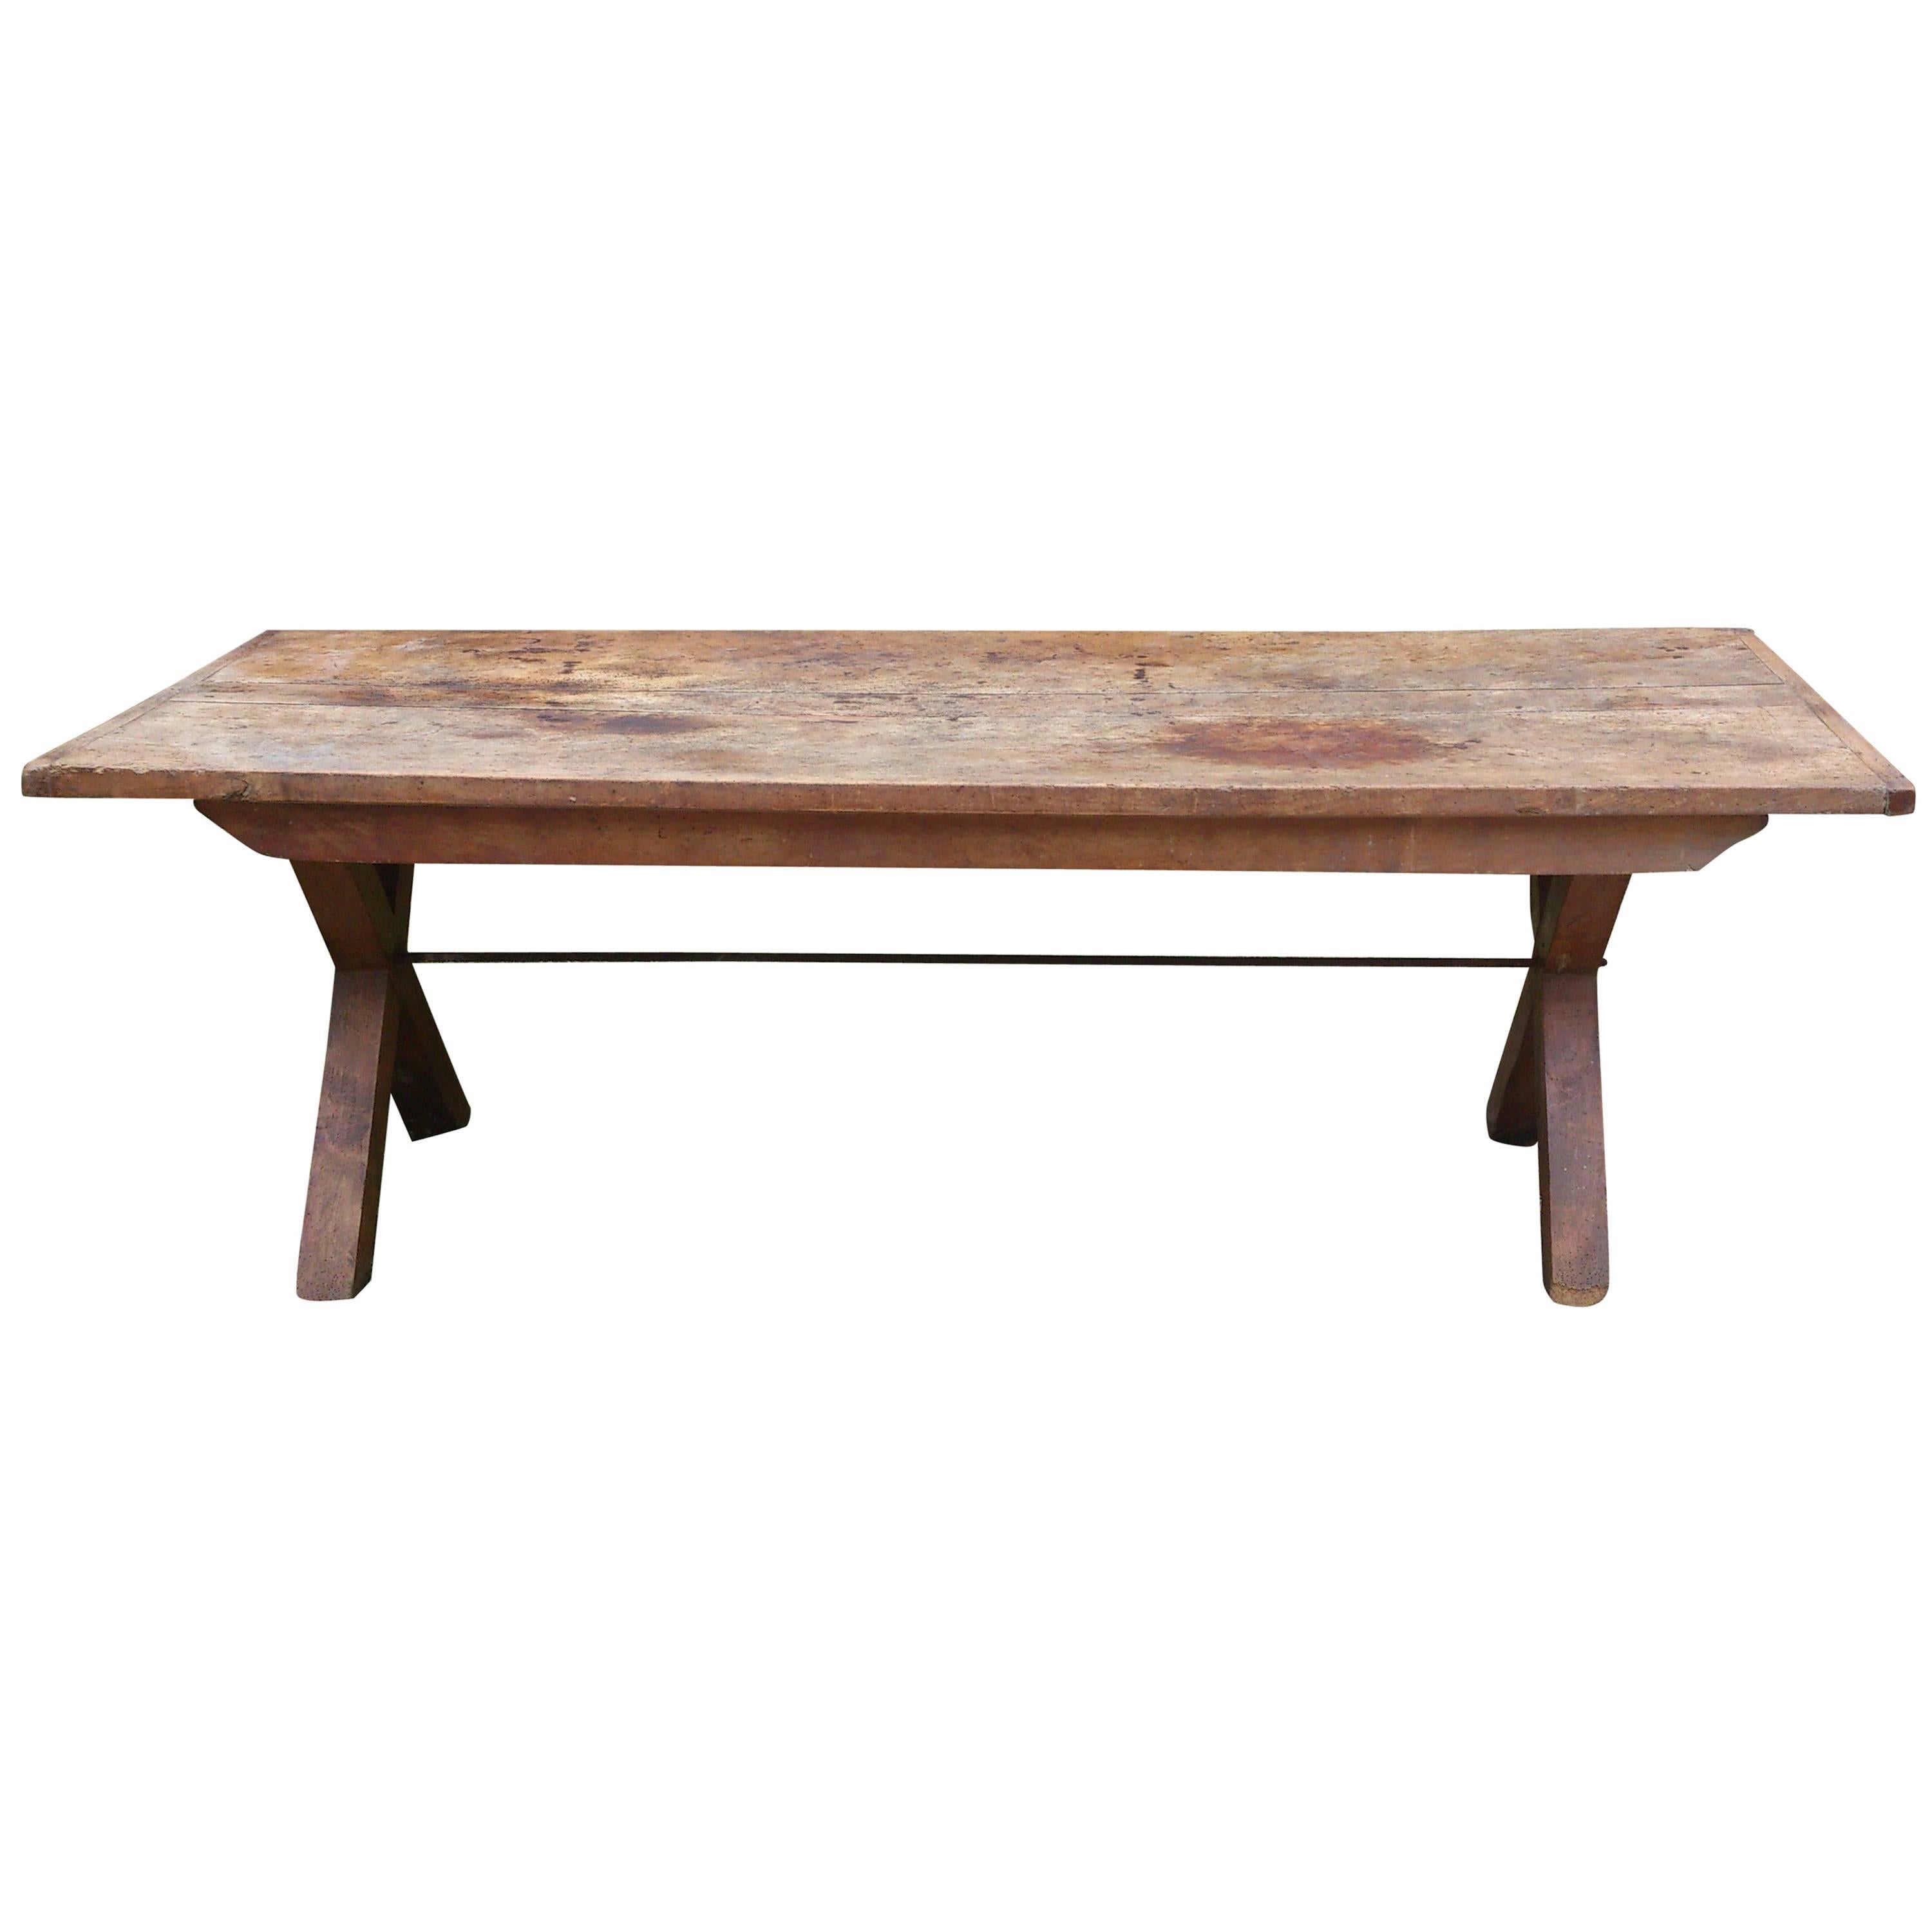 18th Century Georgian Sycamore & Elm Antique Vernacular Refectory Dining Table For Sale